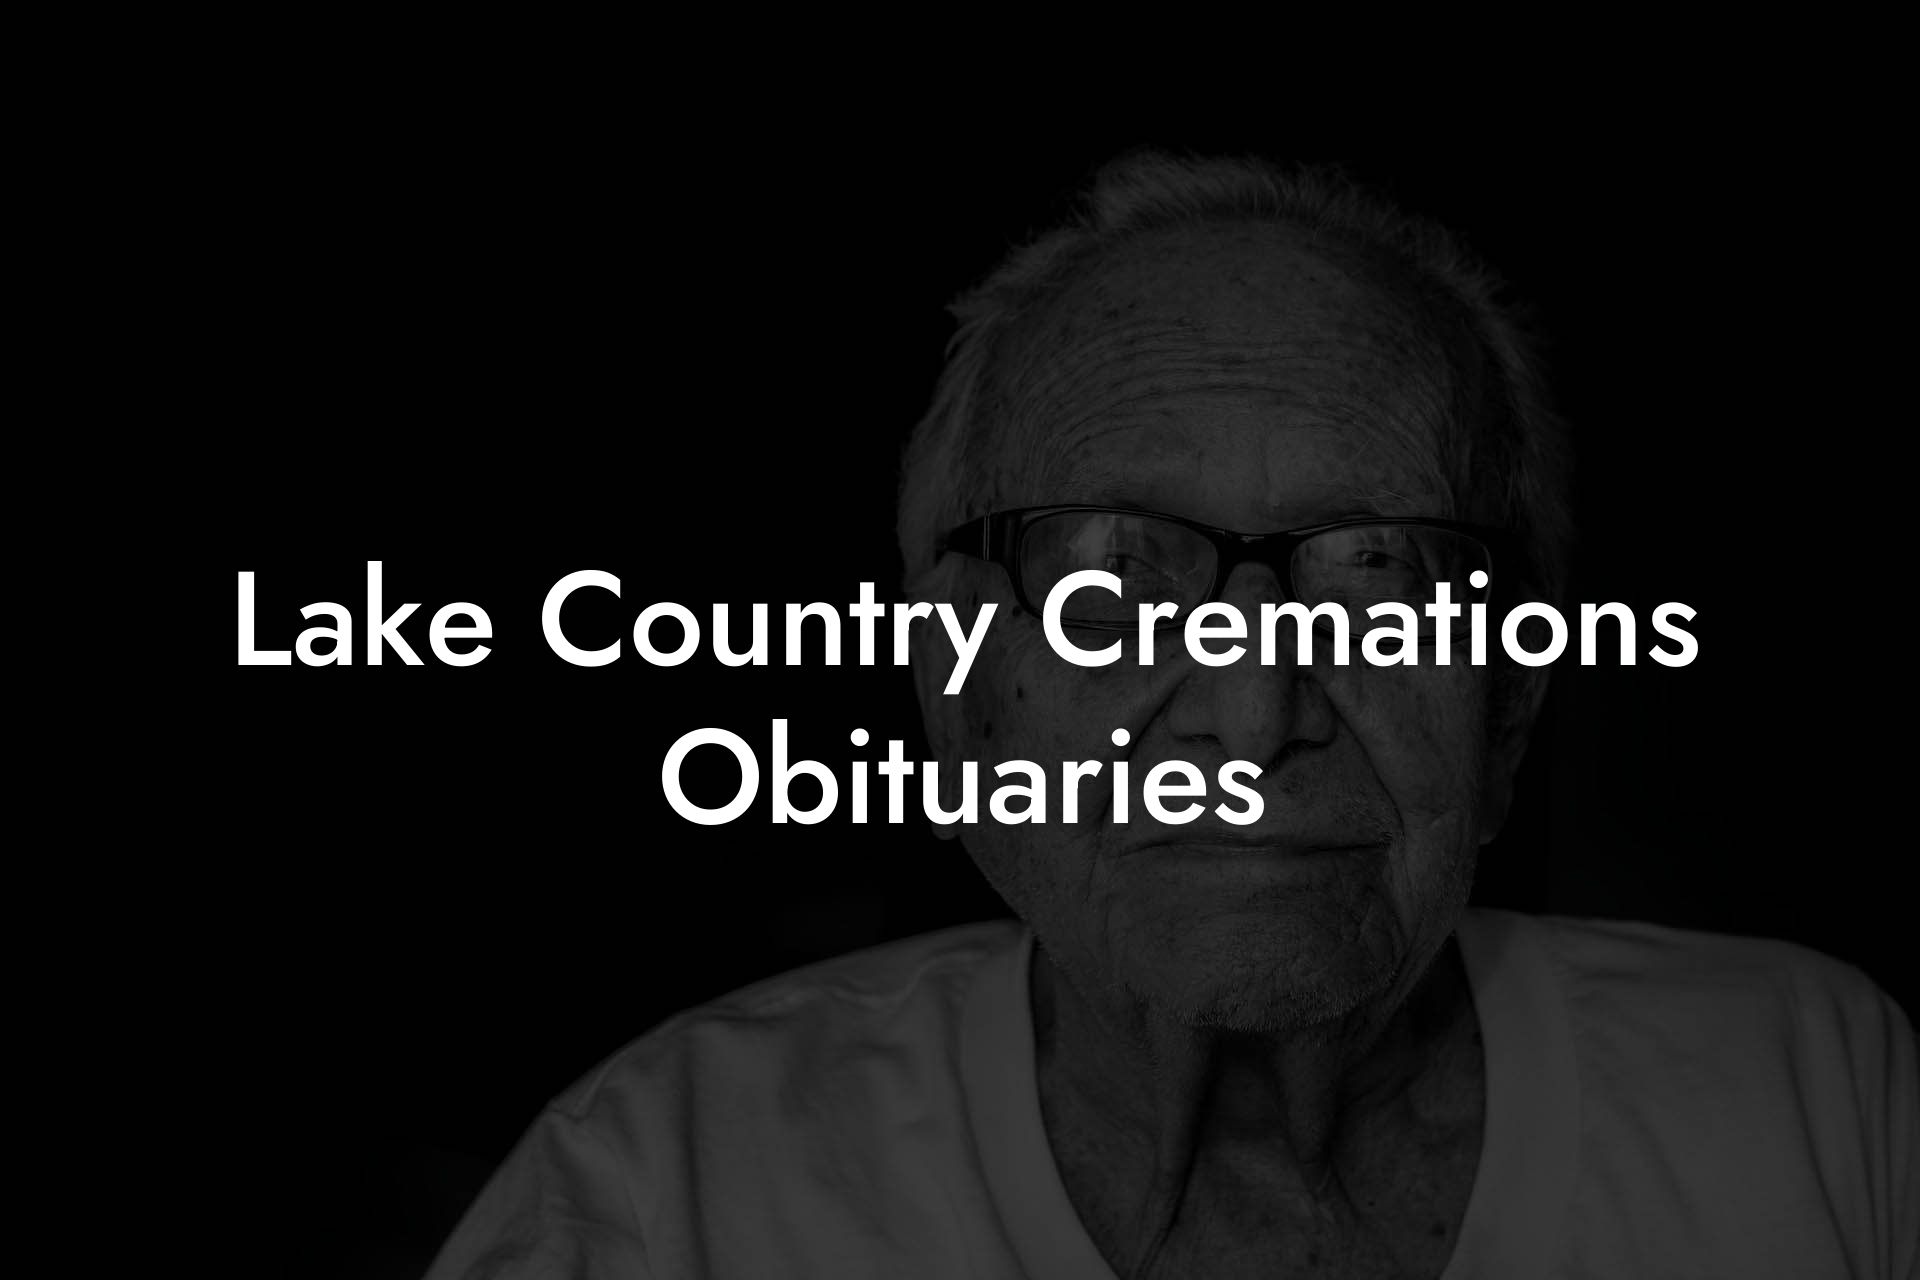 Lake Country Cremations Obituaries